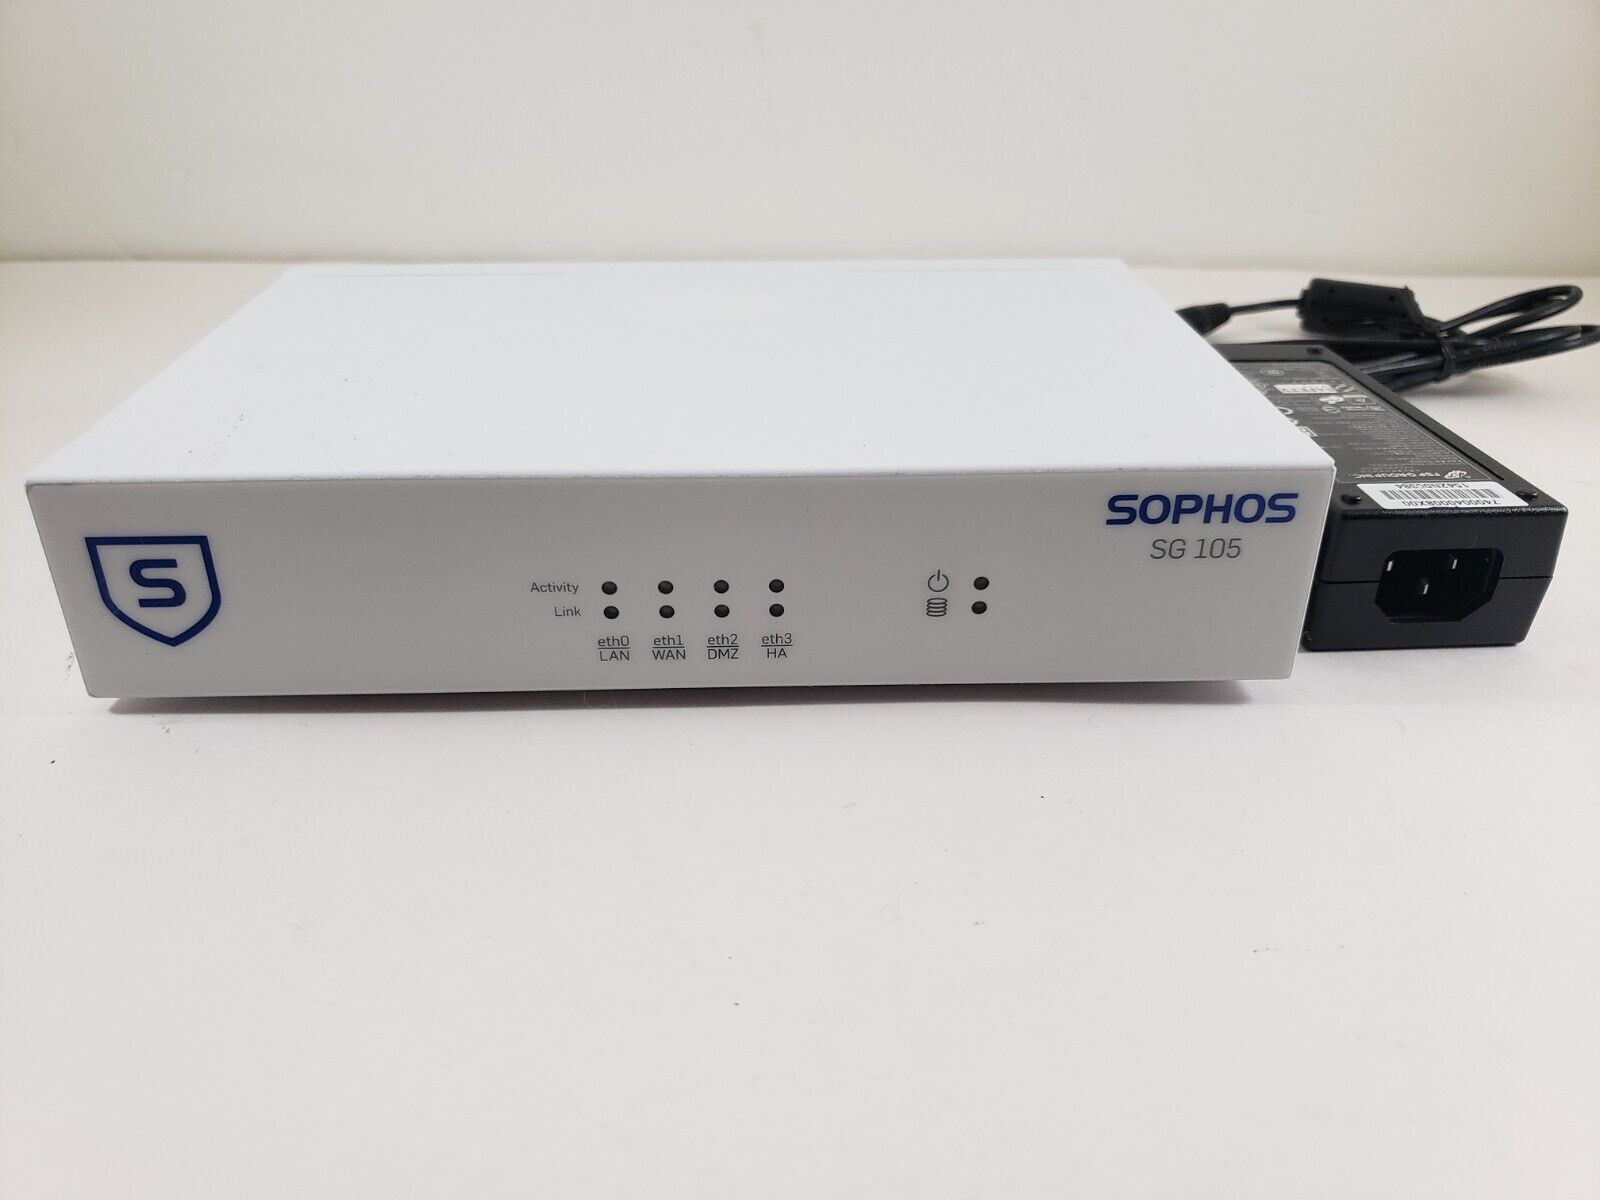 Sophos SG-105 Rev.2 Firewall W/ Power Supply needs AC Cord-Tested and Works